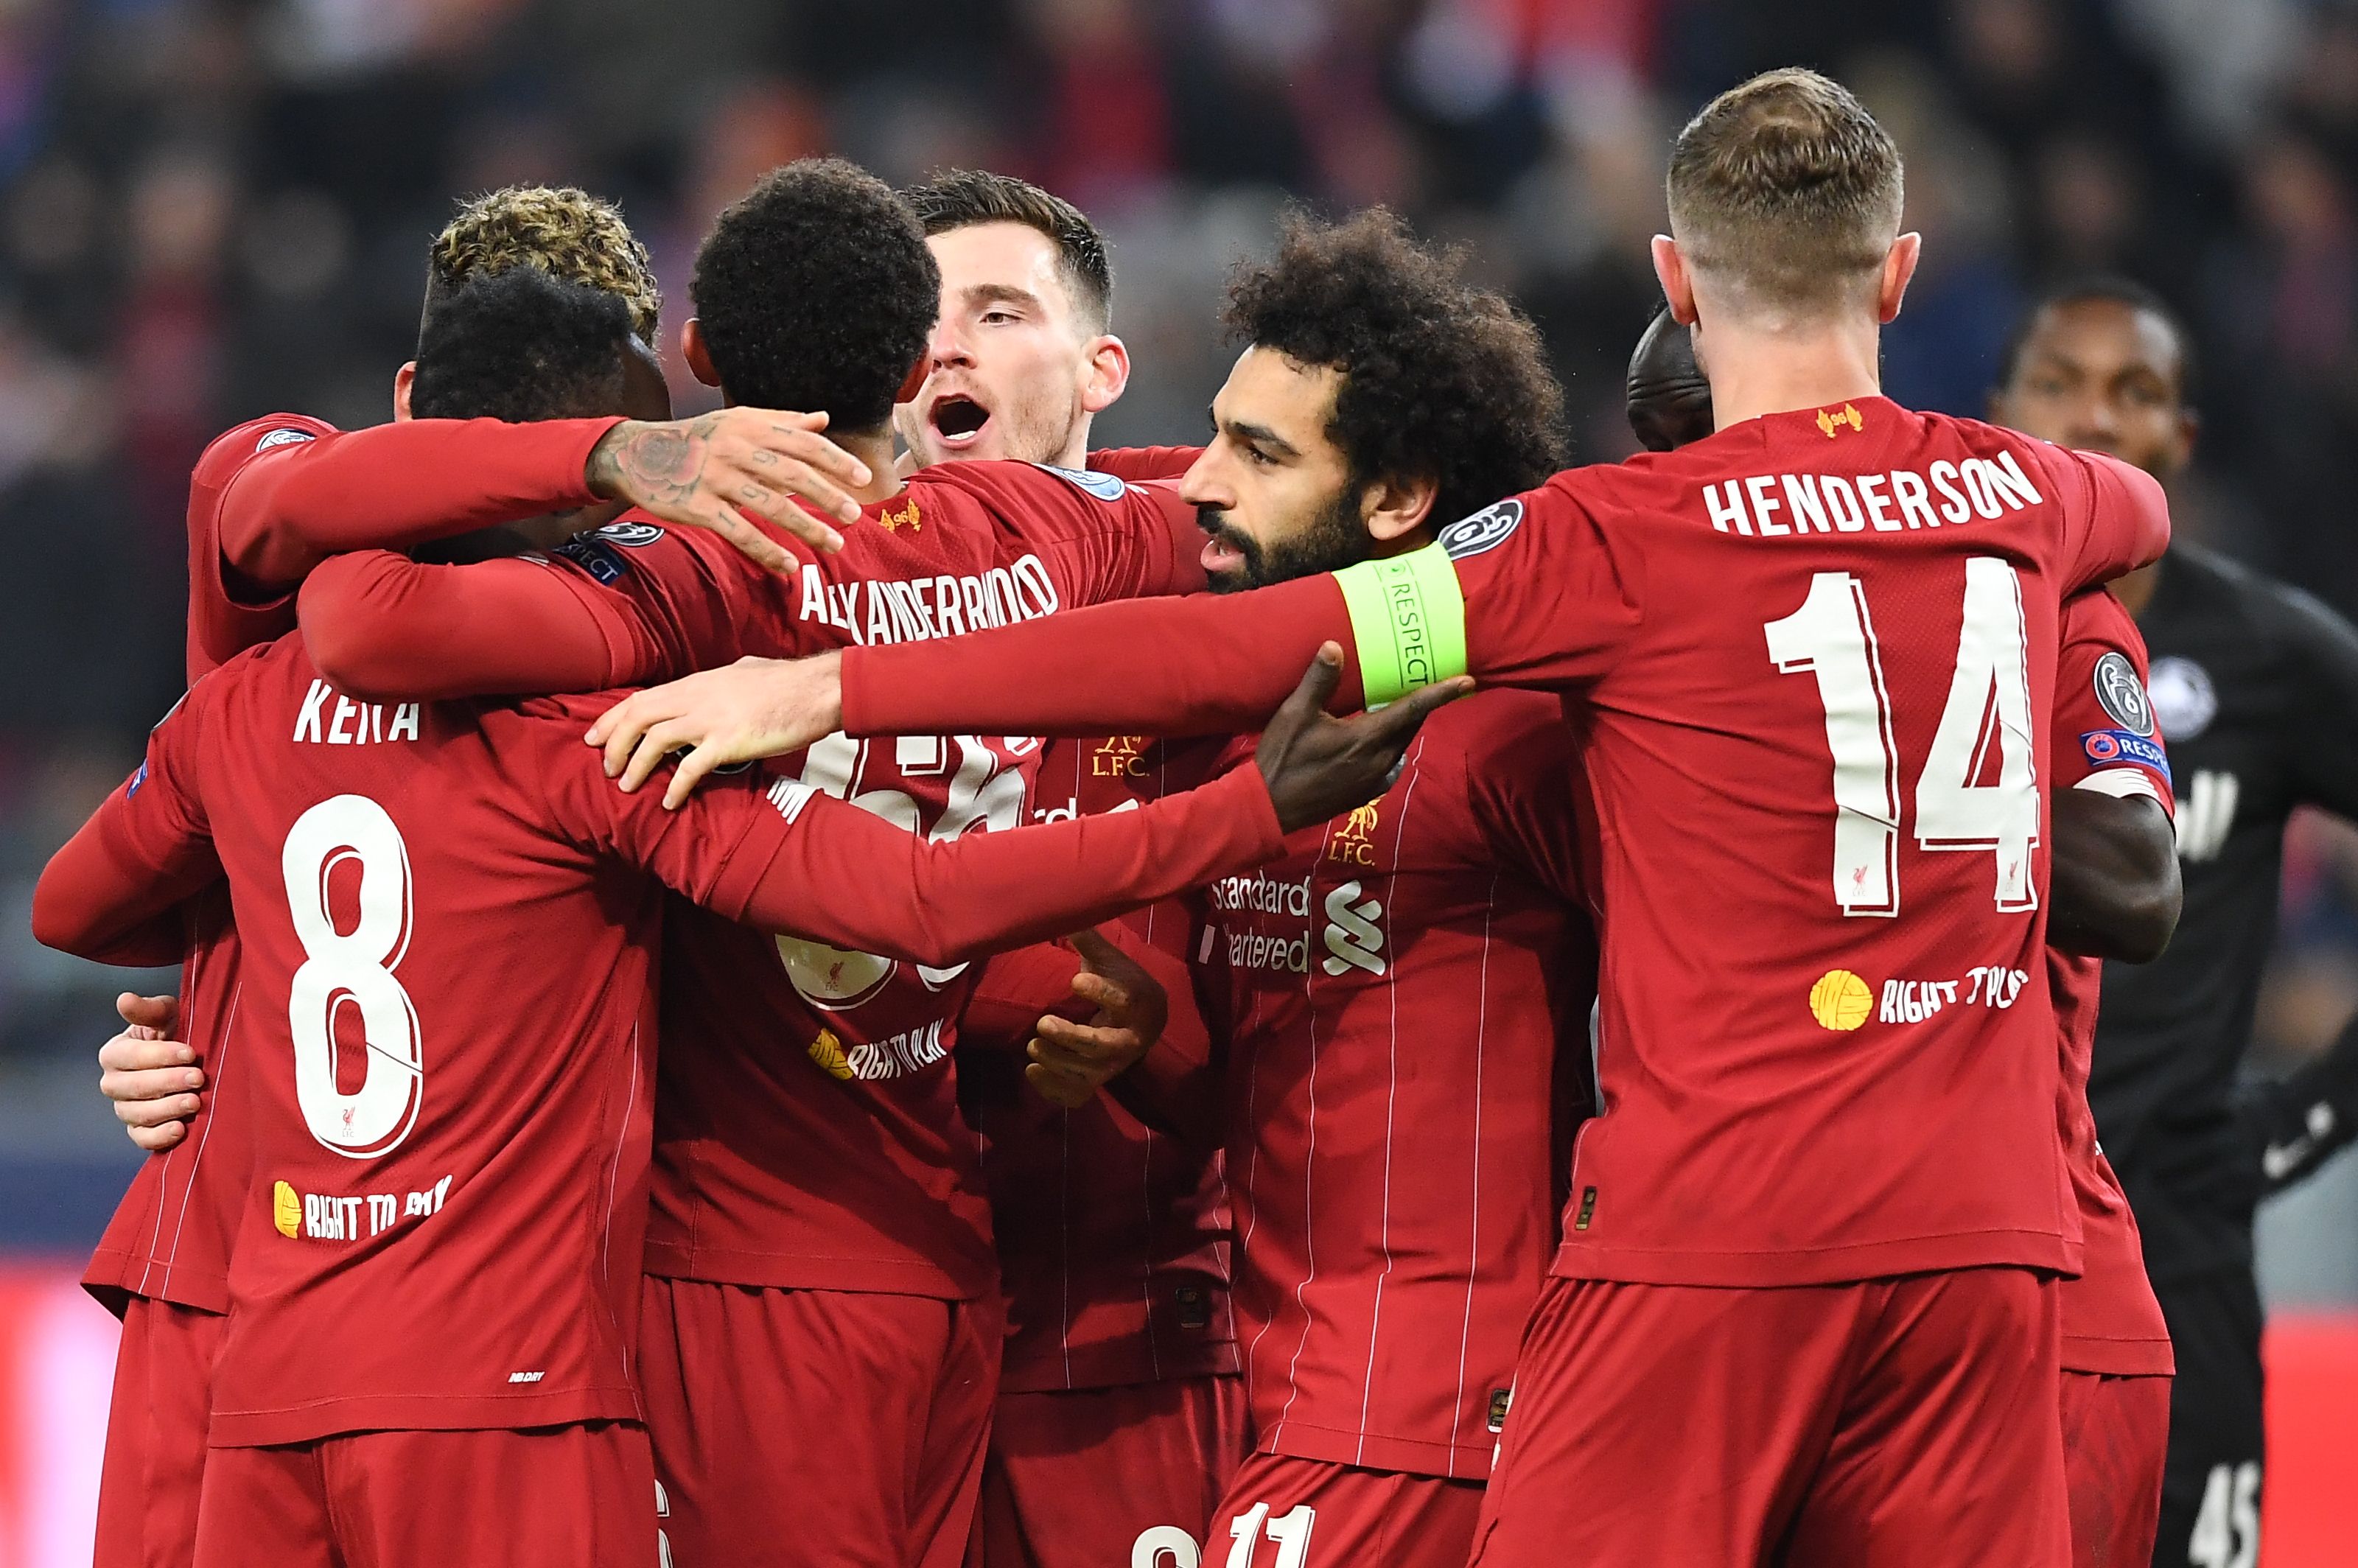 Liverpool's team celebrates after scoring during the UEFA Champions League Group E football match between RB Salzburg and Liverpool FC on December 10, 2019 in Salzburg, Austria. (Photo by JOE KLAMAR / AFP) (Photo by JOE KLAMAR/AFP via Getty Images)